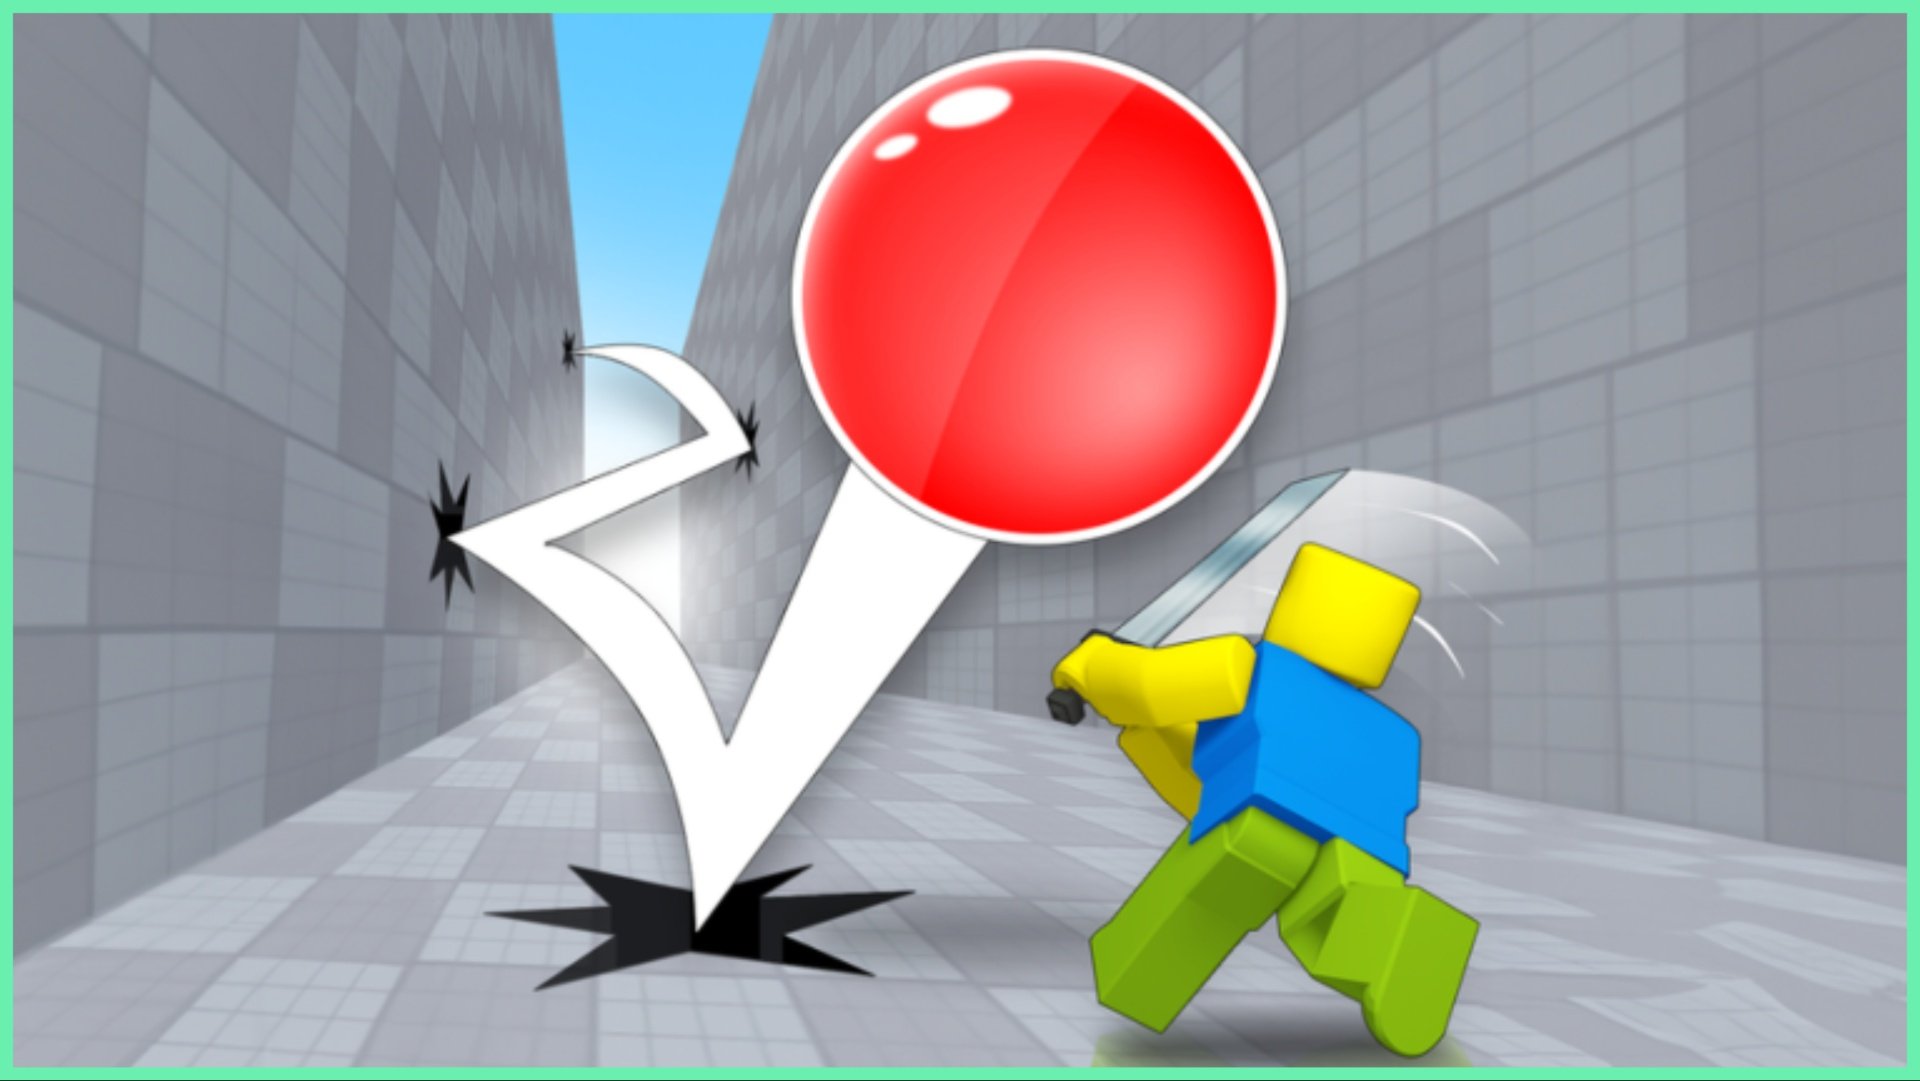 the image shows a large red ball hitting off gridded walls from a grey gridded platform and heading towards a player who is whacking a sword into the ball to divert its trajectory